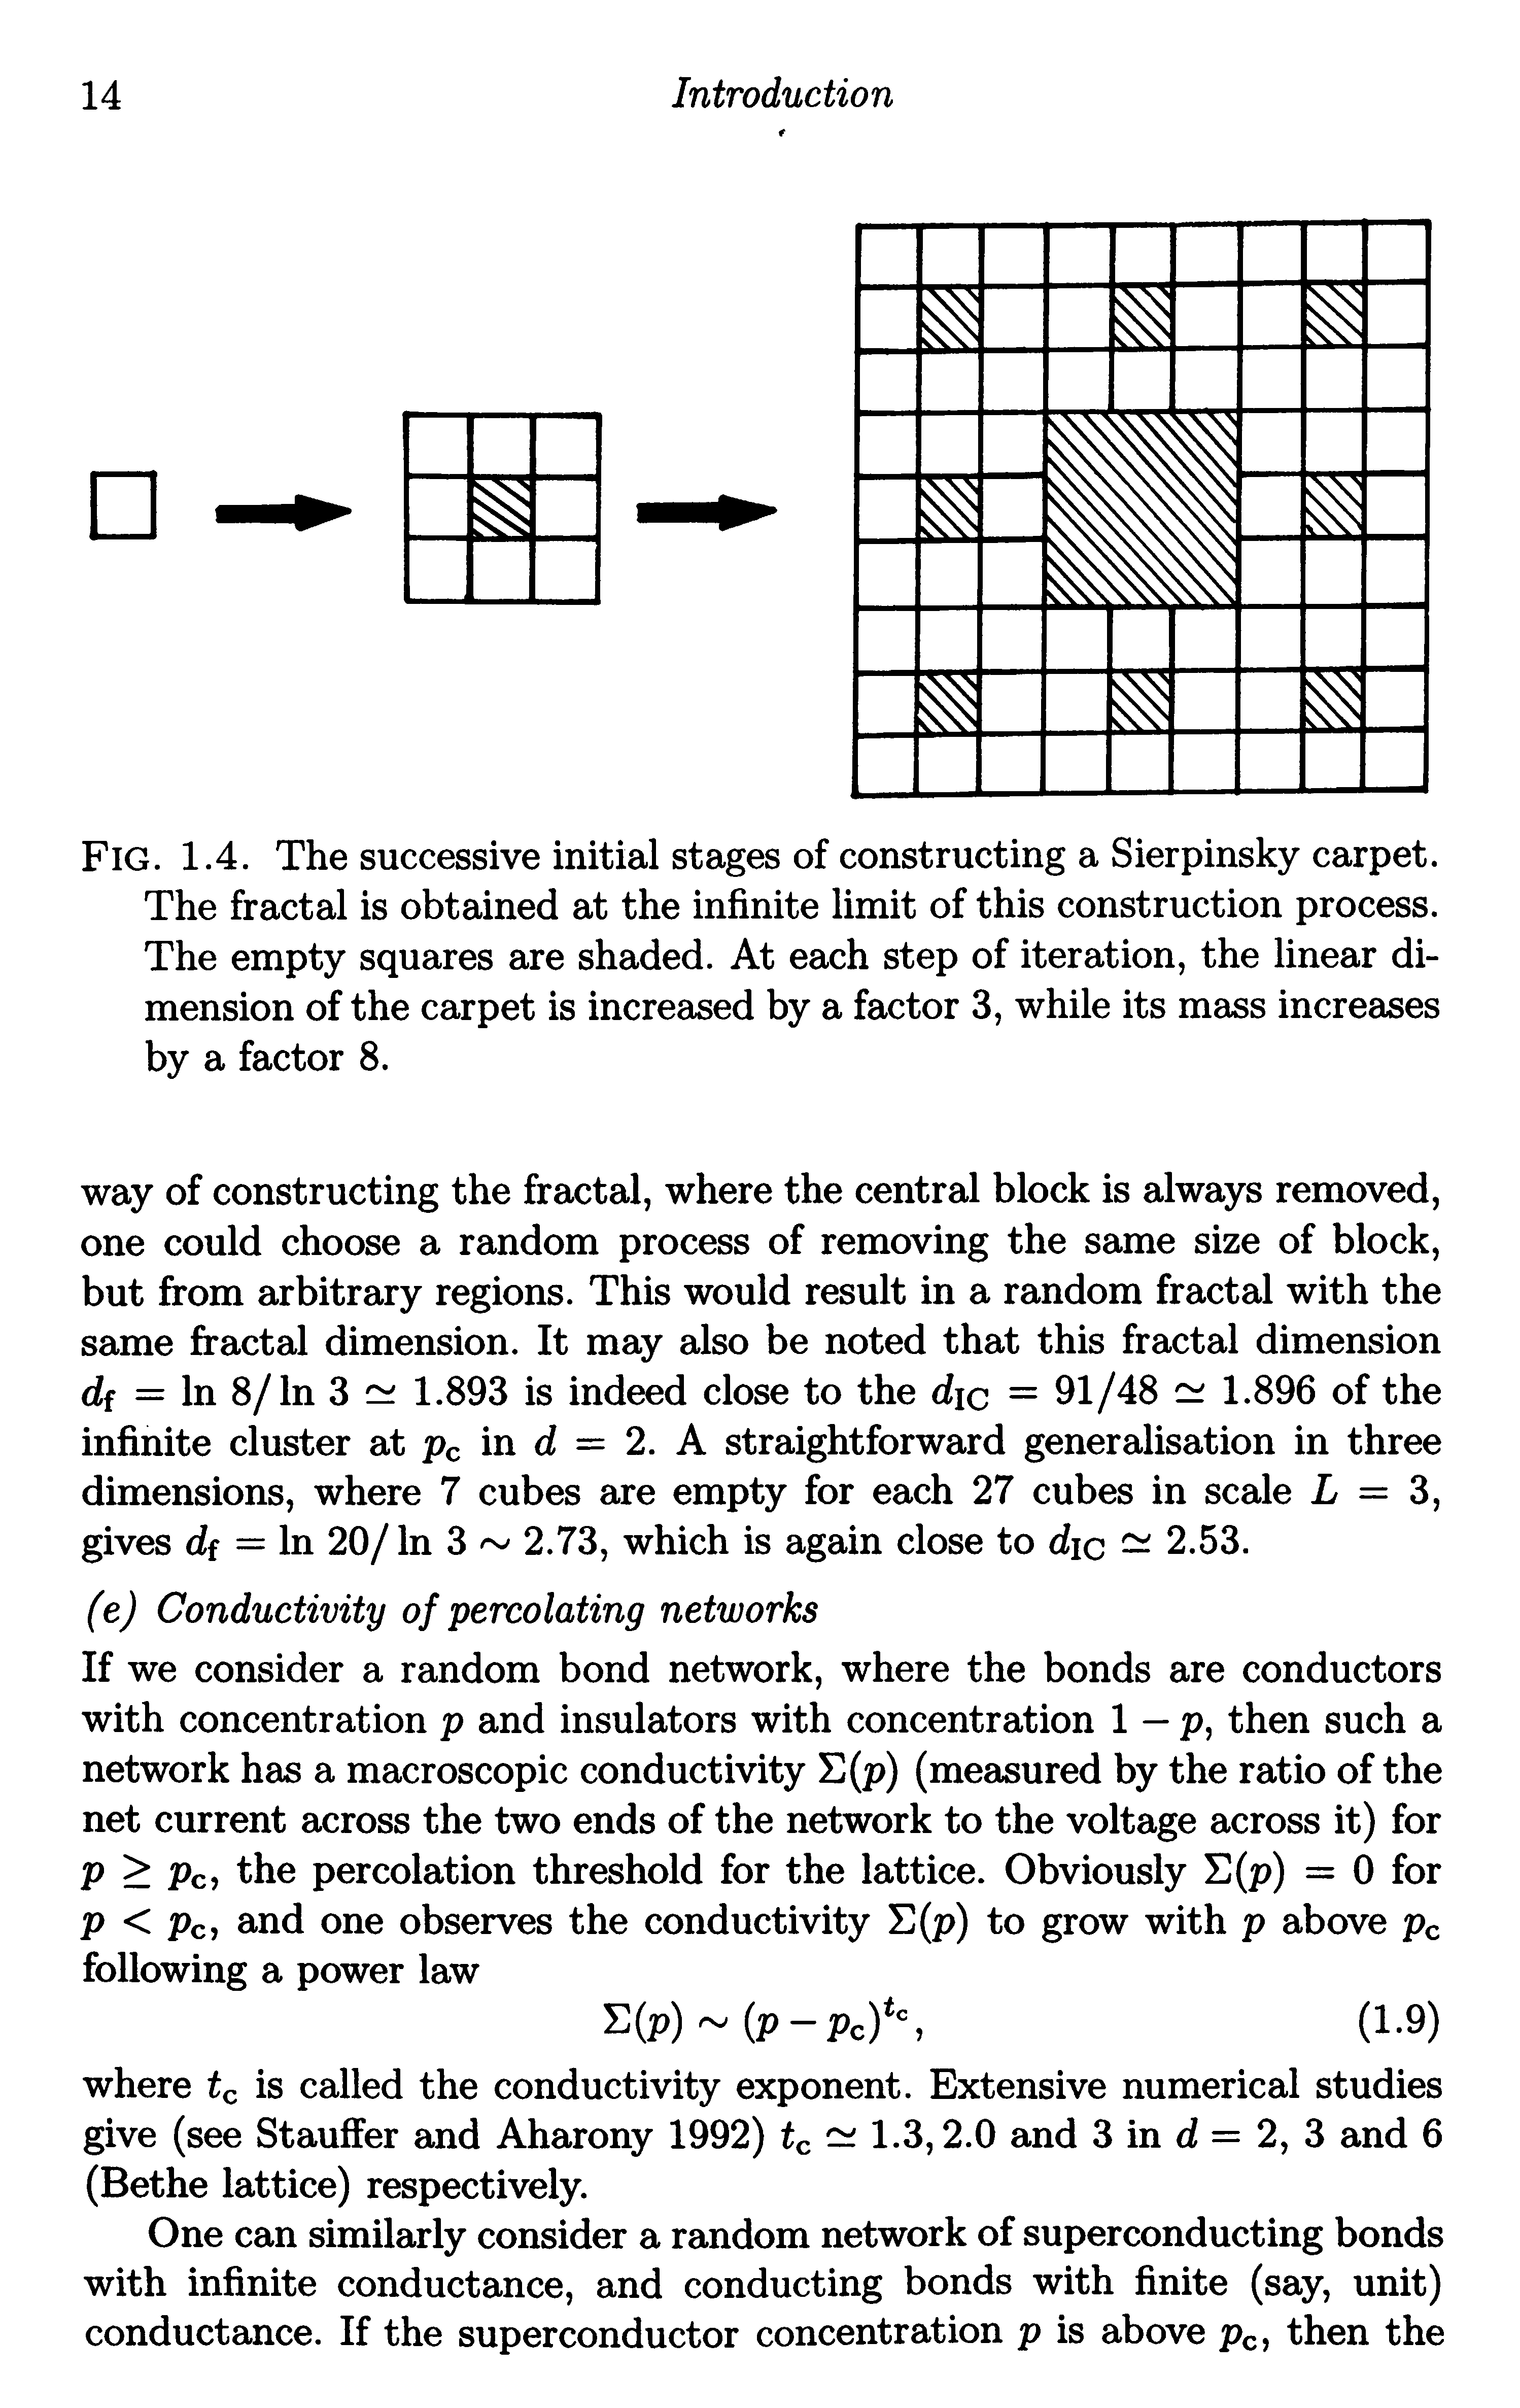 Fig. 1.4. The successive initial stages of constructing a Sierpinsky carpet. The fractal is obtained at the infinite limit of this construction process. The empty squares are shaded. At each step of iteration, the linear dimension of the carpet is increased by a factor 3, while its mass increases by a factor 8.